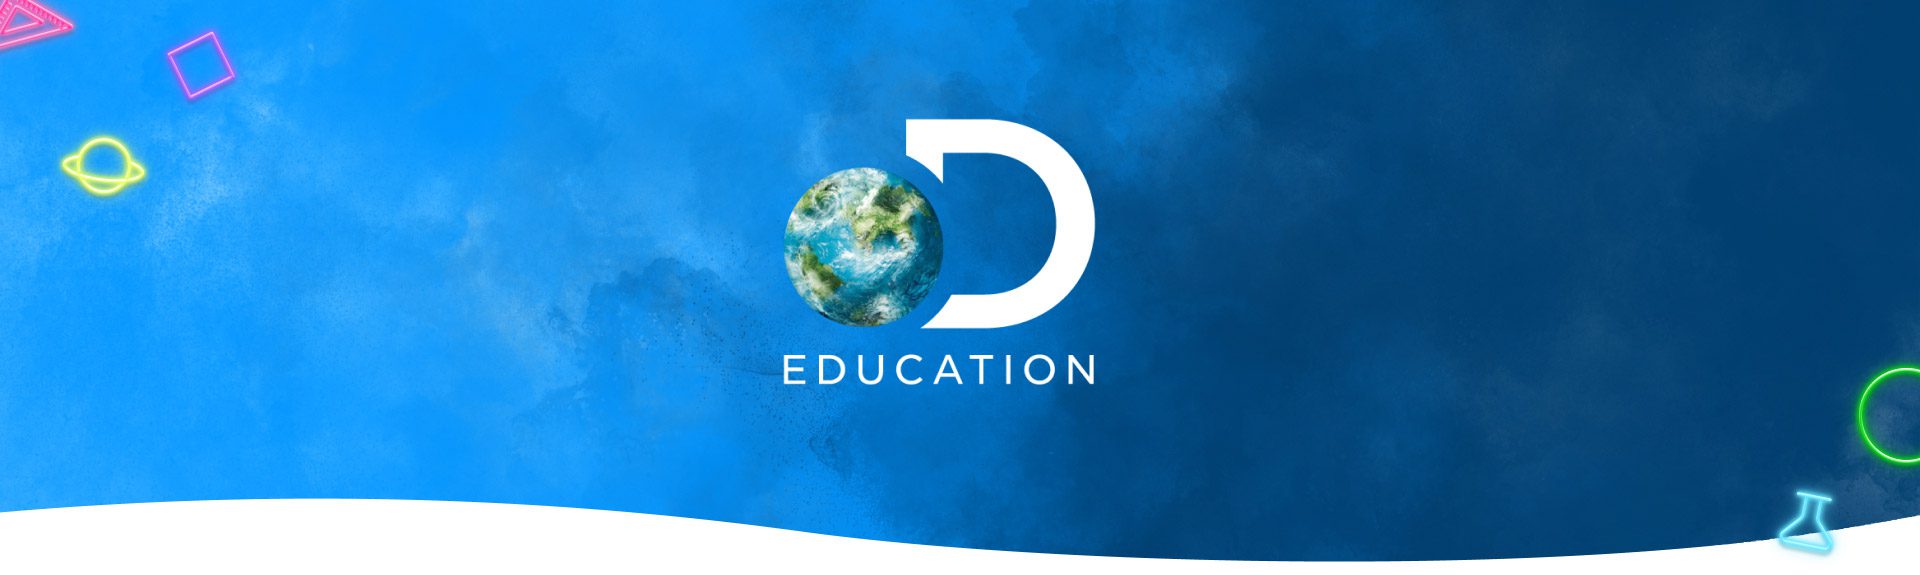 Webinar: Create engaging learning activities with Discovery Education Studio